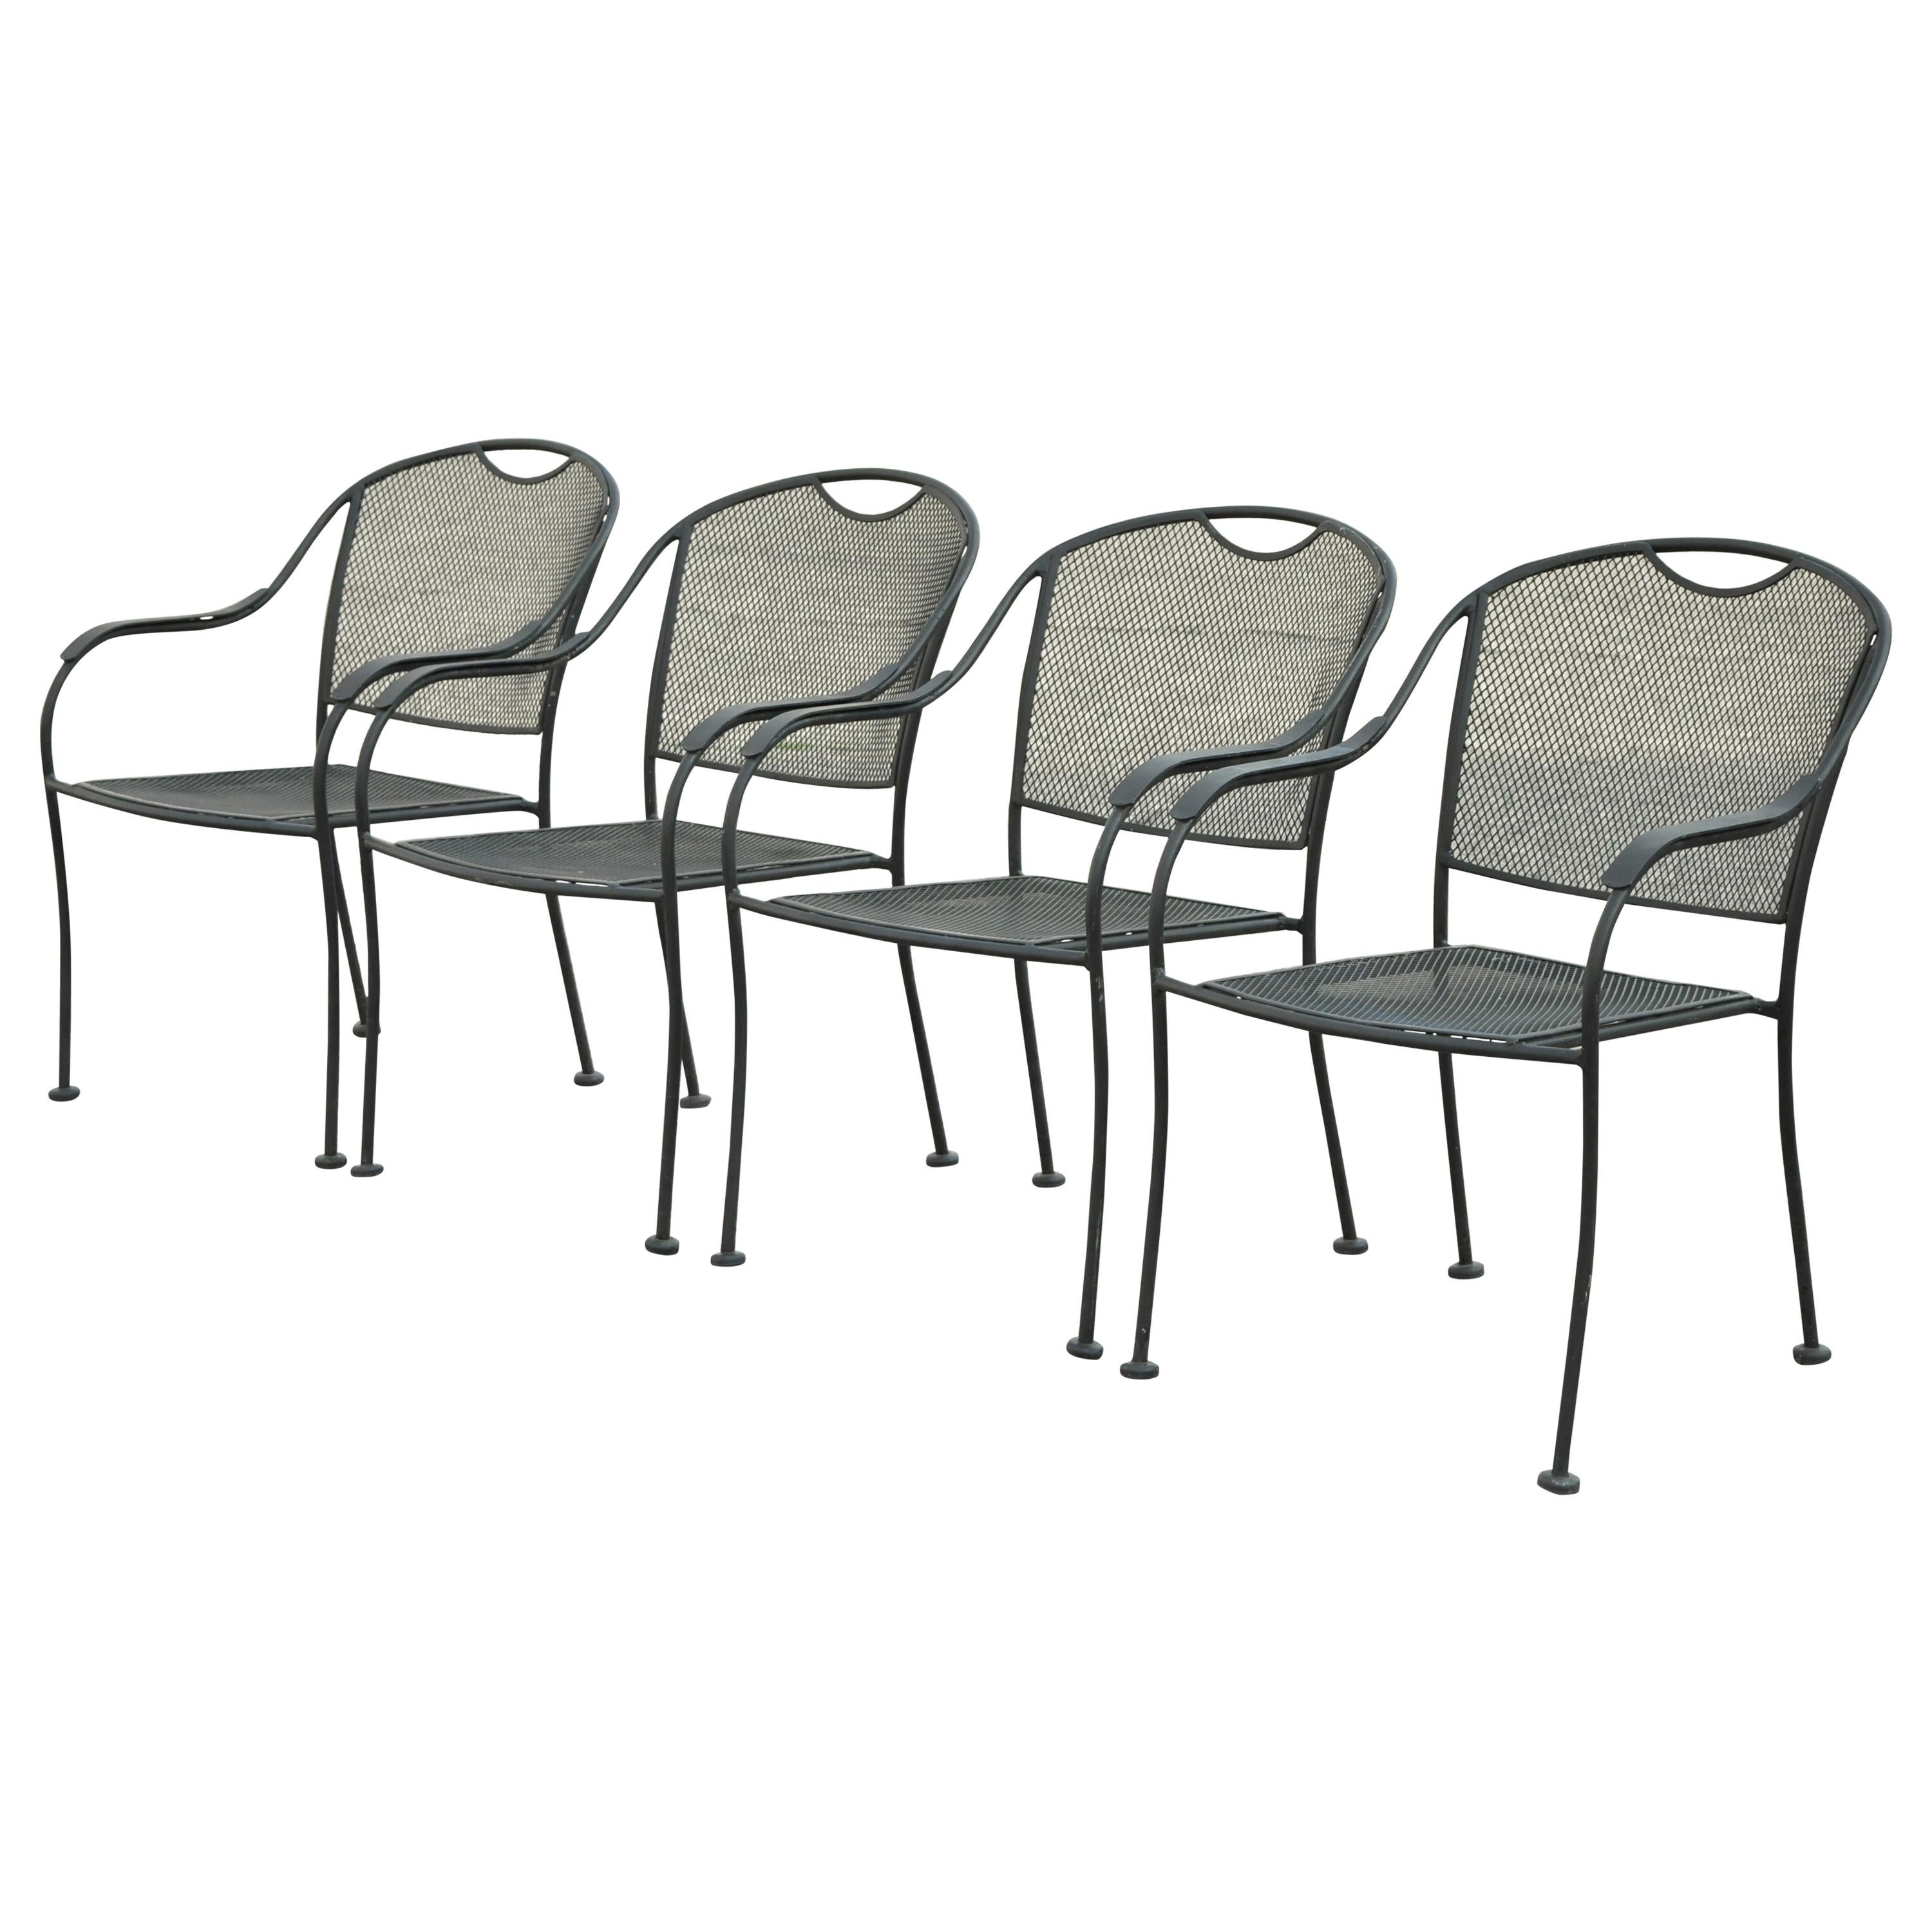 20th Century Modern Wrought Iron Sculptural Black Outdoor Armchairs, Set of 4 For Sale